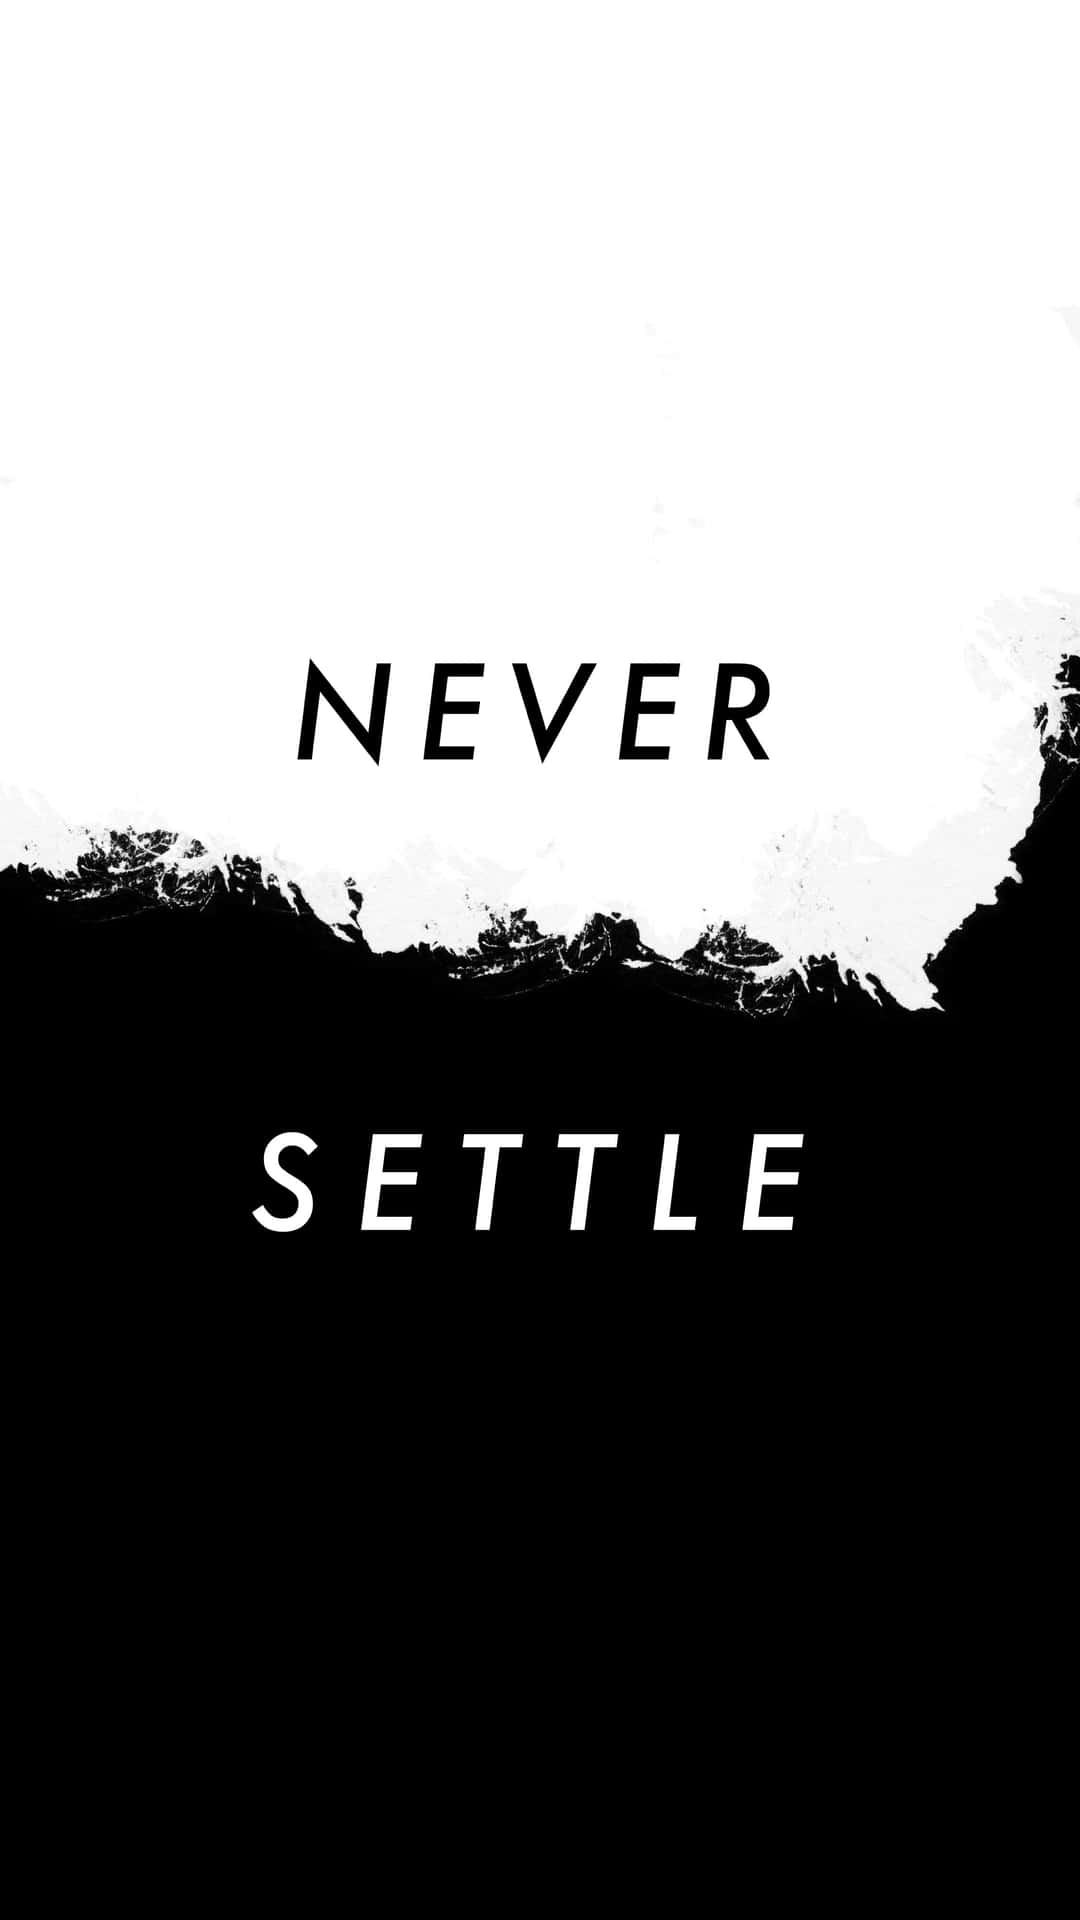 Never Settle - A Black And White Photo